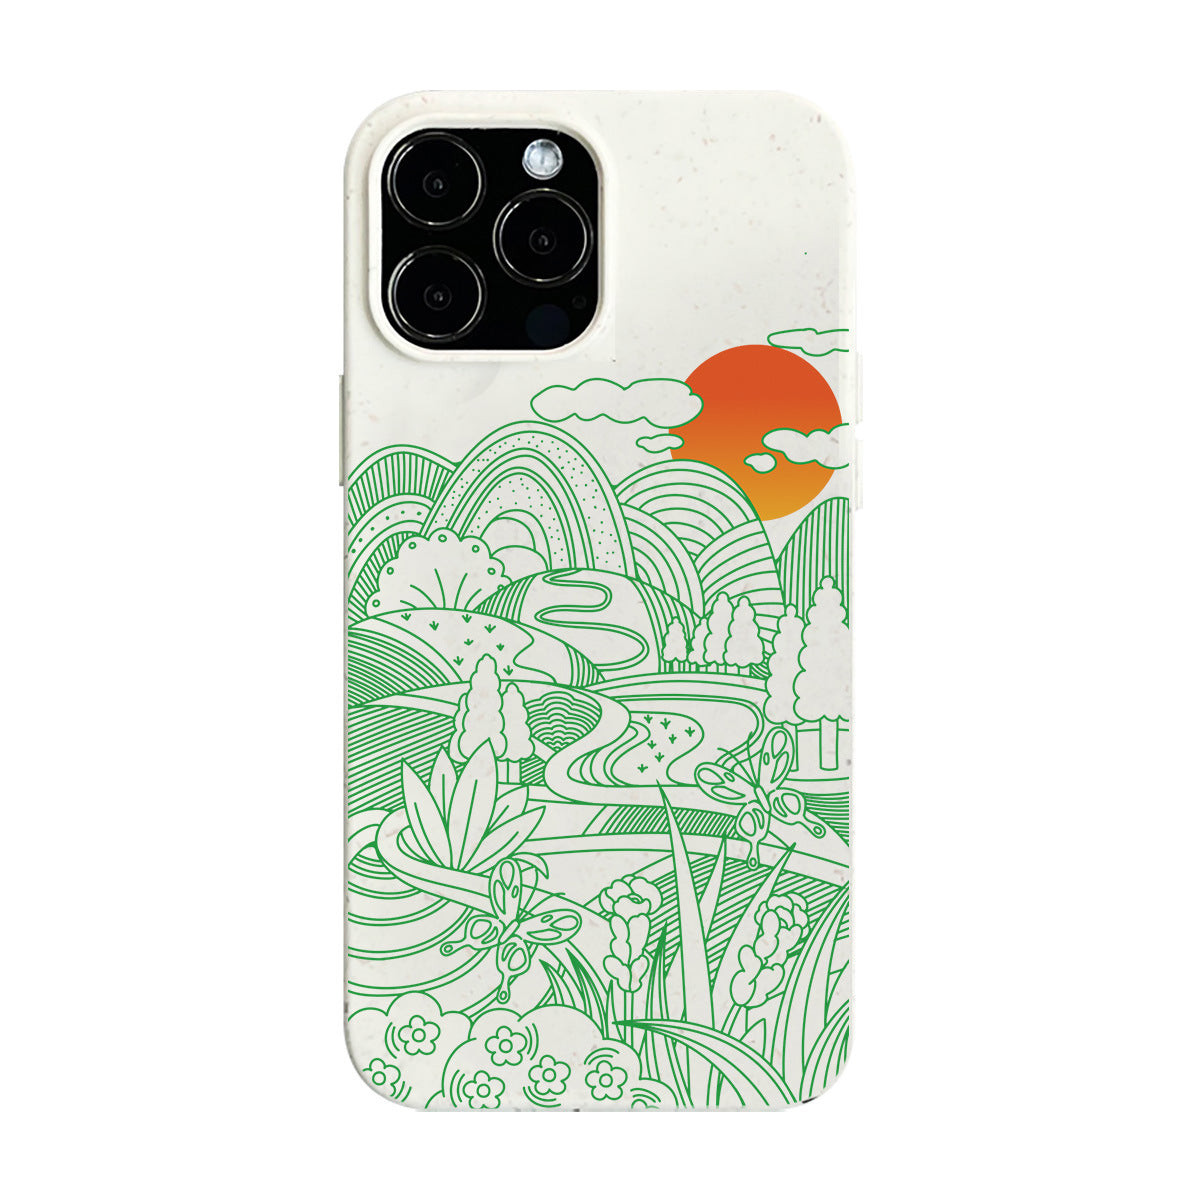 Natural Wheat Straw Bio-Degradable iPhone Case 